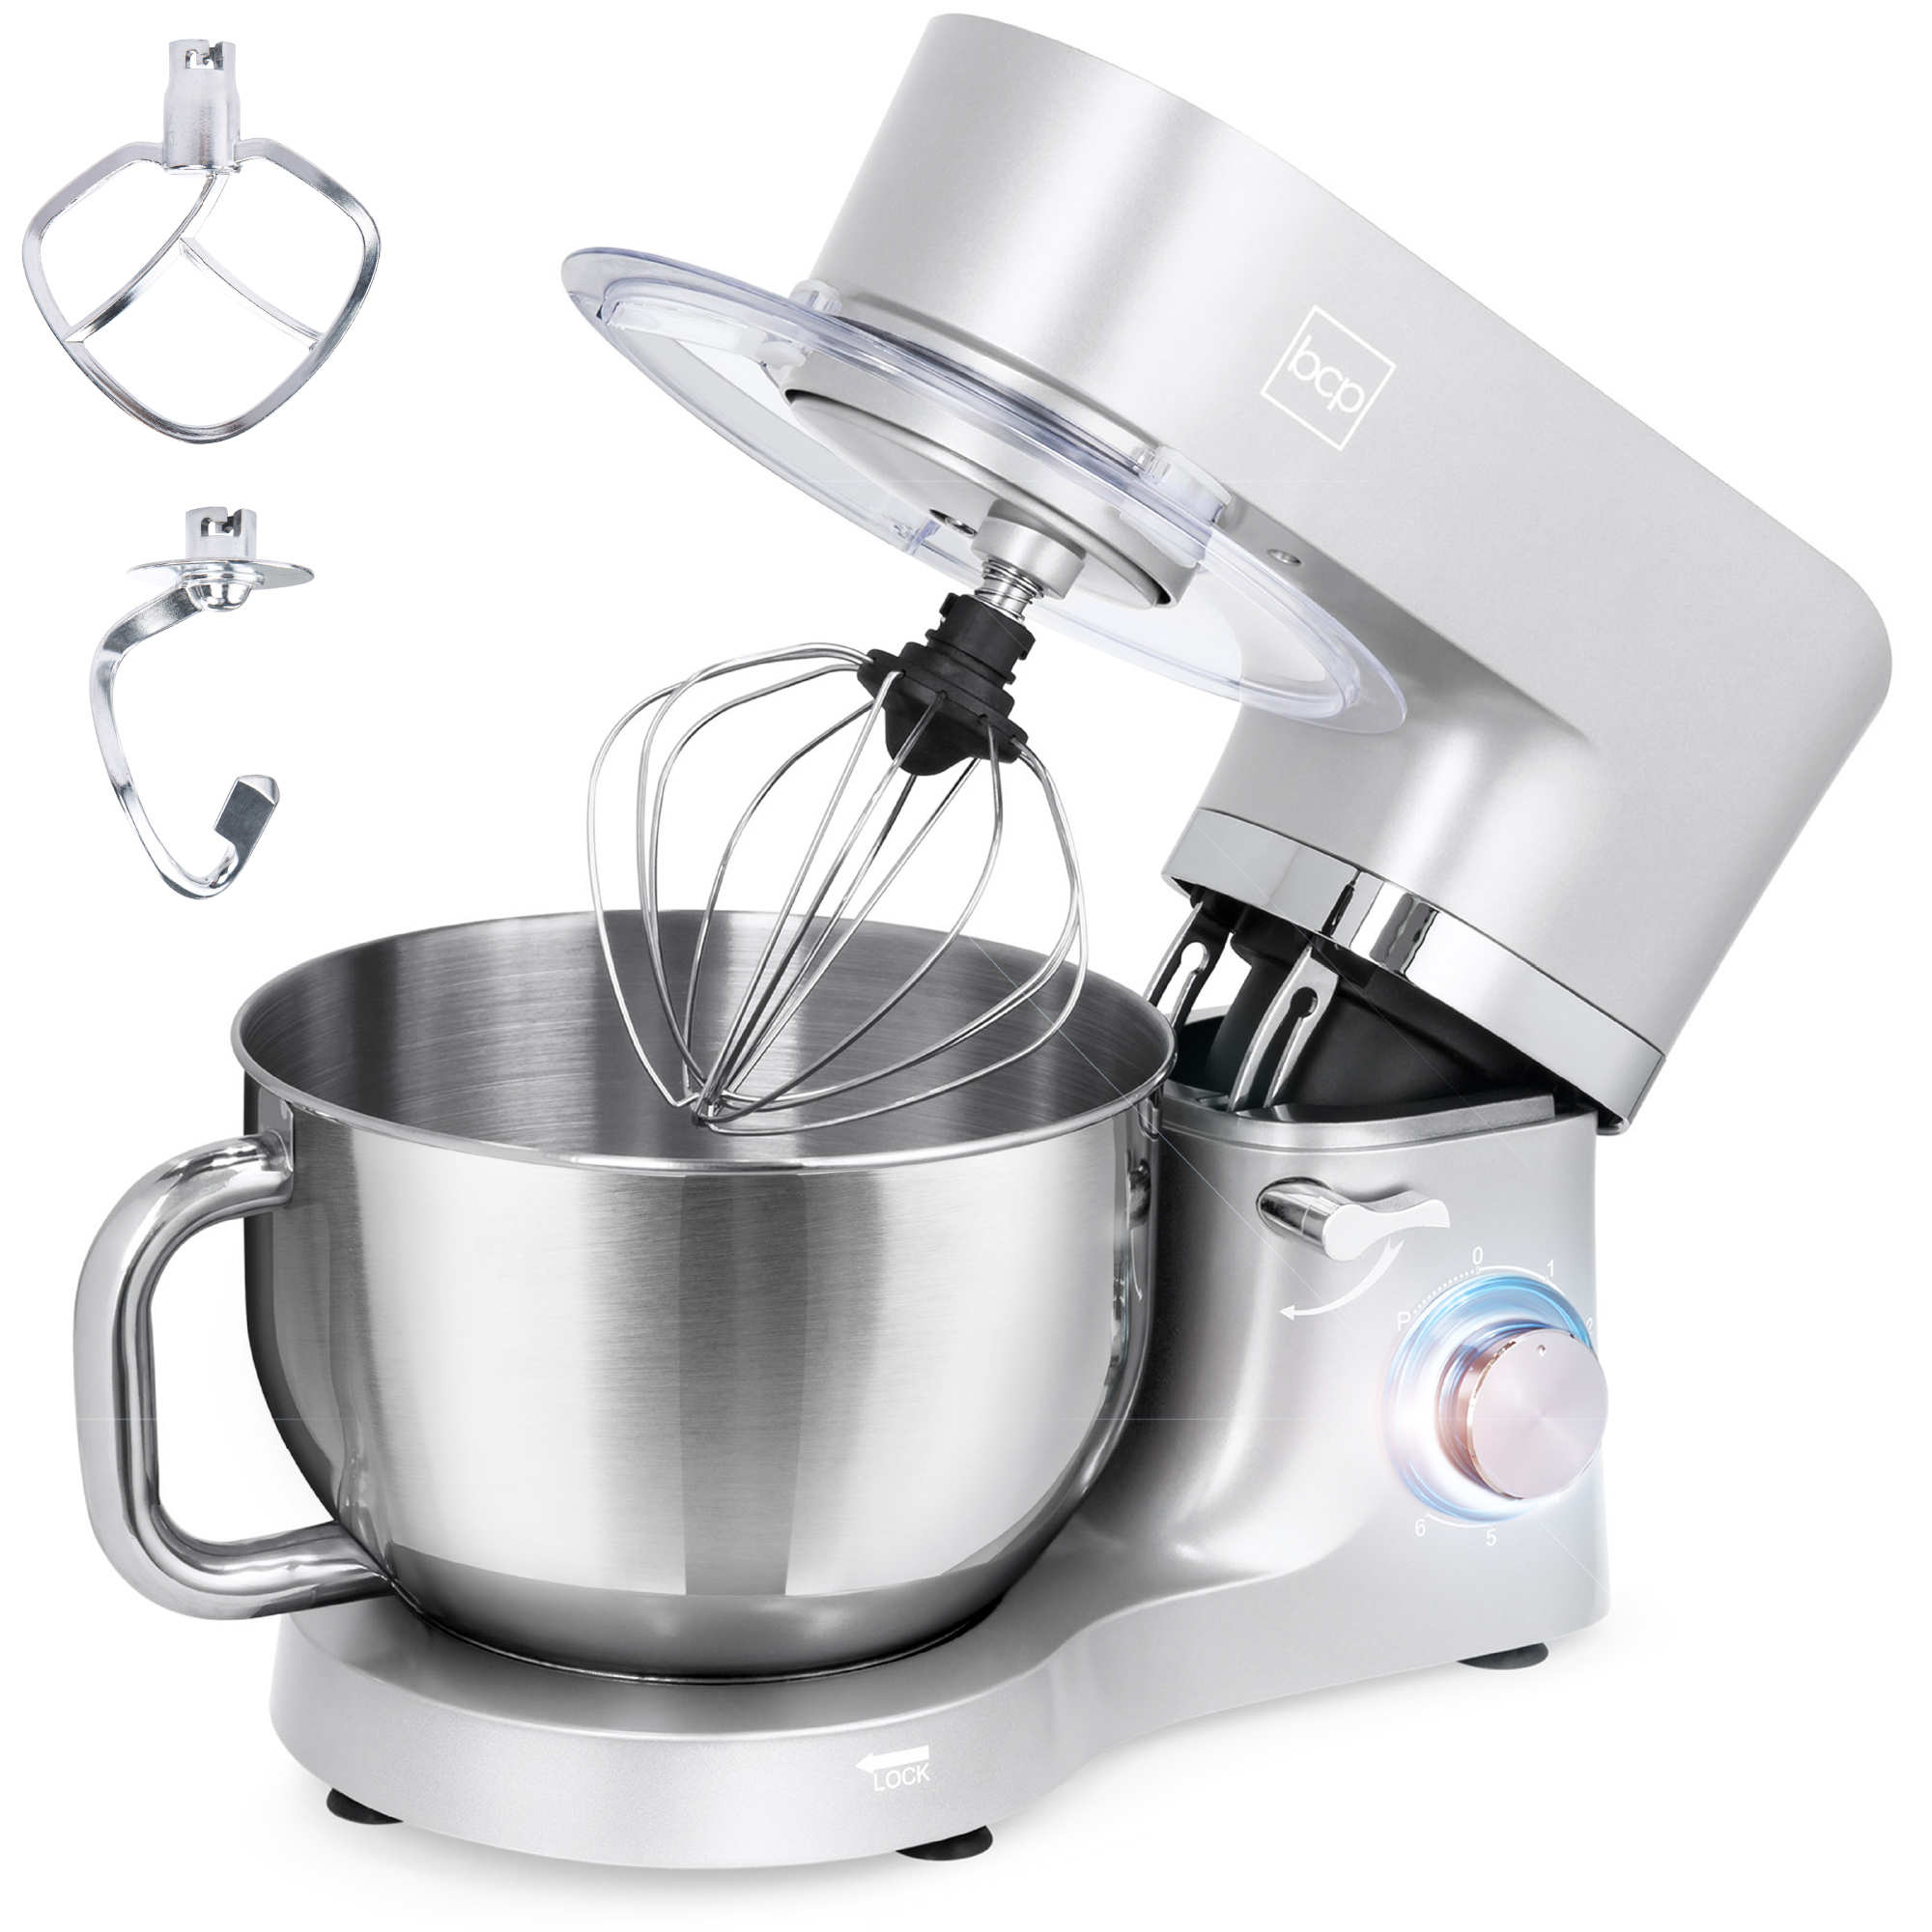 Best Choice Products 6.3qt 660W 6-Speed Tilt-Head Stainless Steel Kitchen Mixer w/ 3 Attachments, Splash Guard - Silver - image 1 of 7